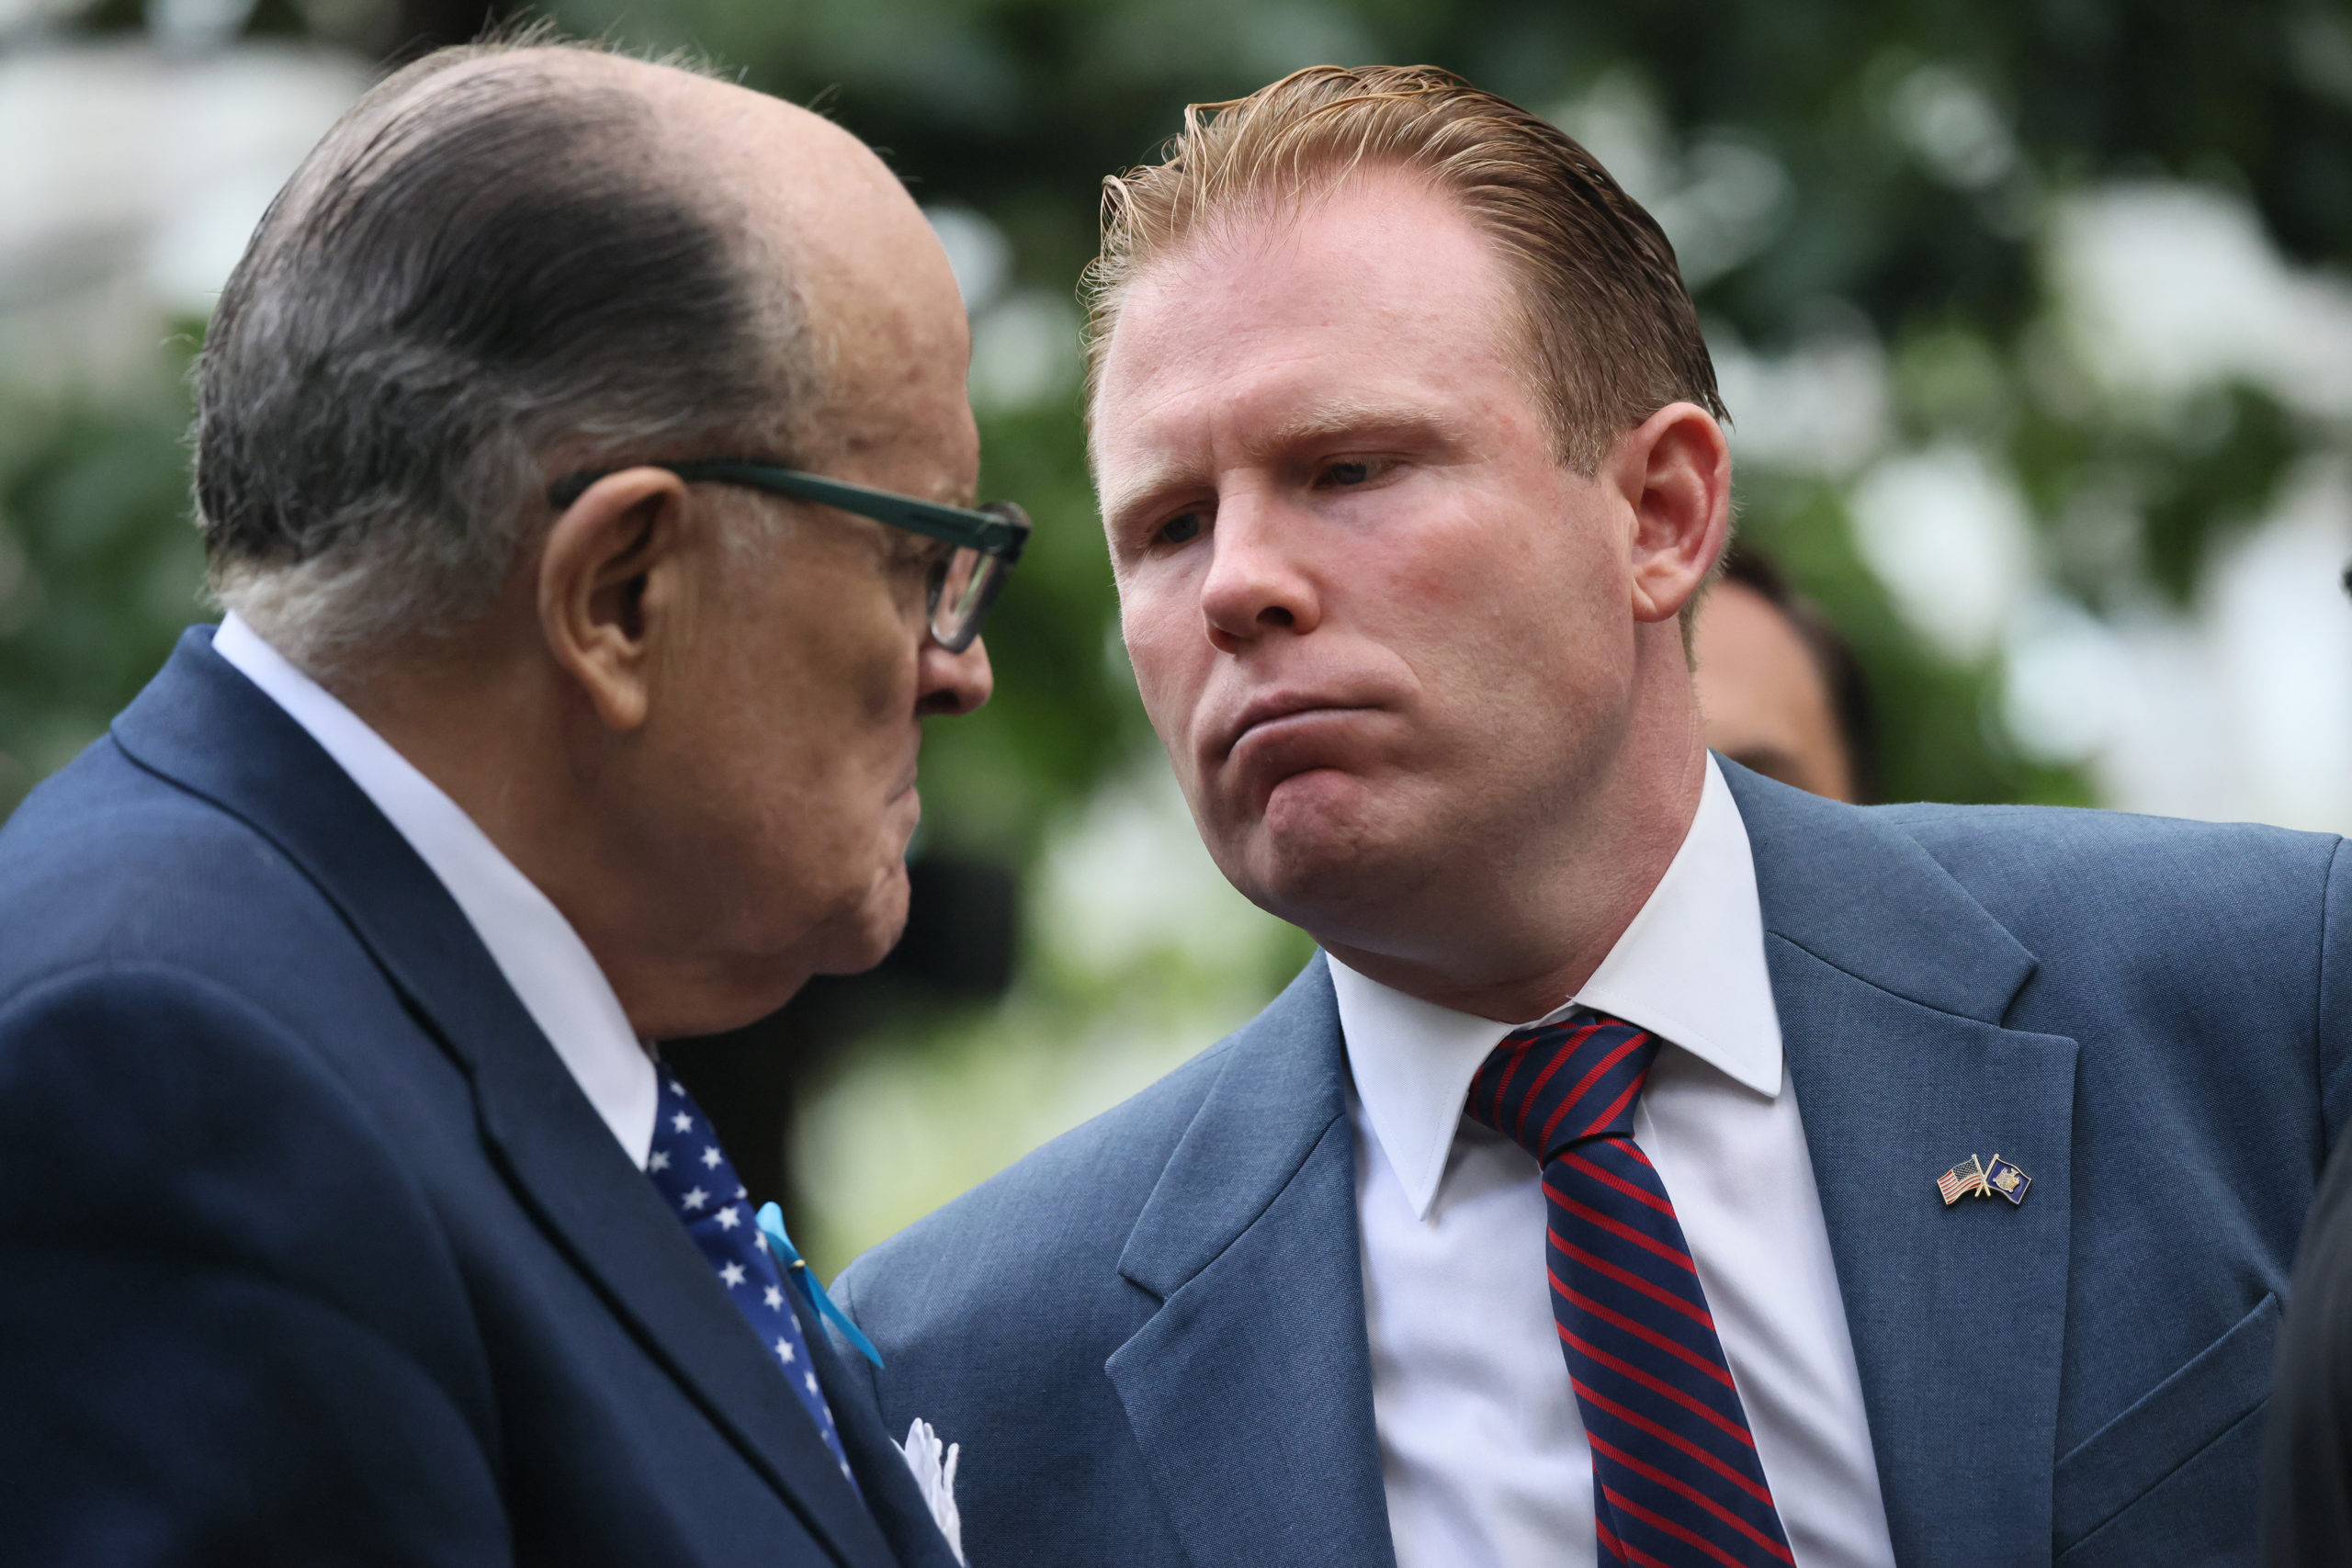 Former New York City Mayor and attorney of former US President Donald Trump, Rudy Giuliani and his son Andrew Giuliani speak during the annual 9/11 Commemoration Ceremony at the National 9/11 Memorial and Museum on September 11, 2023 in New York City. Family and friends honored the lives of their loved ones on the 22nd anniversary of the terror attacks of September 11, 2001, at the World Trade Center, Shanksville, PA and the Pentagon, that killed nearly 3,000 people. (Photo by Michael M. Santiago/Getty Images)